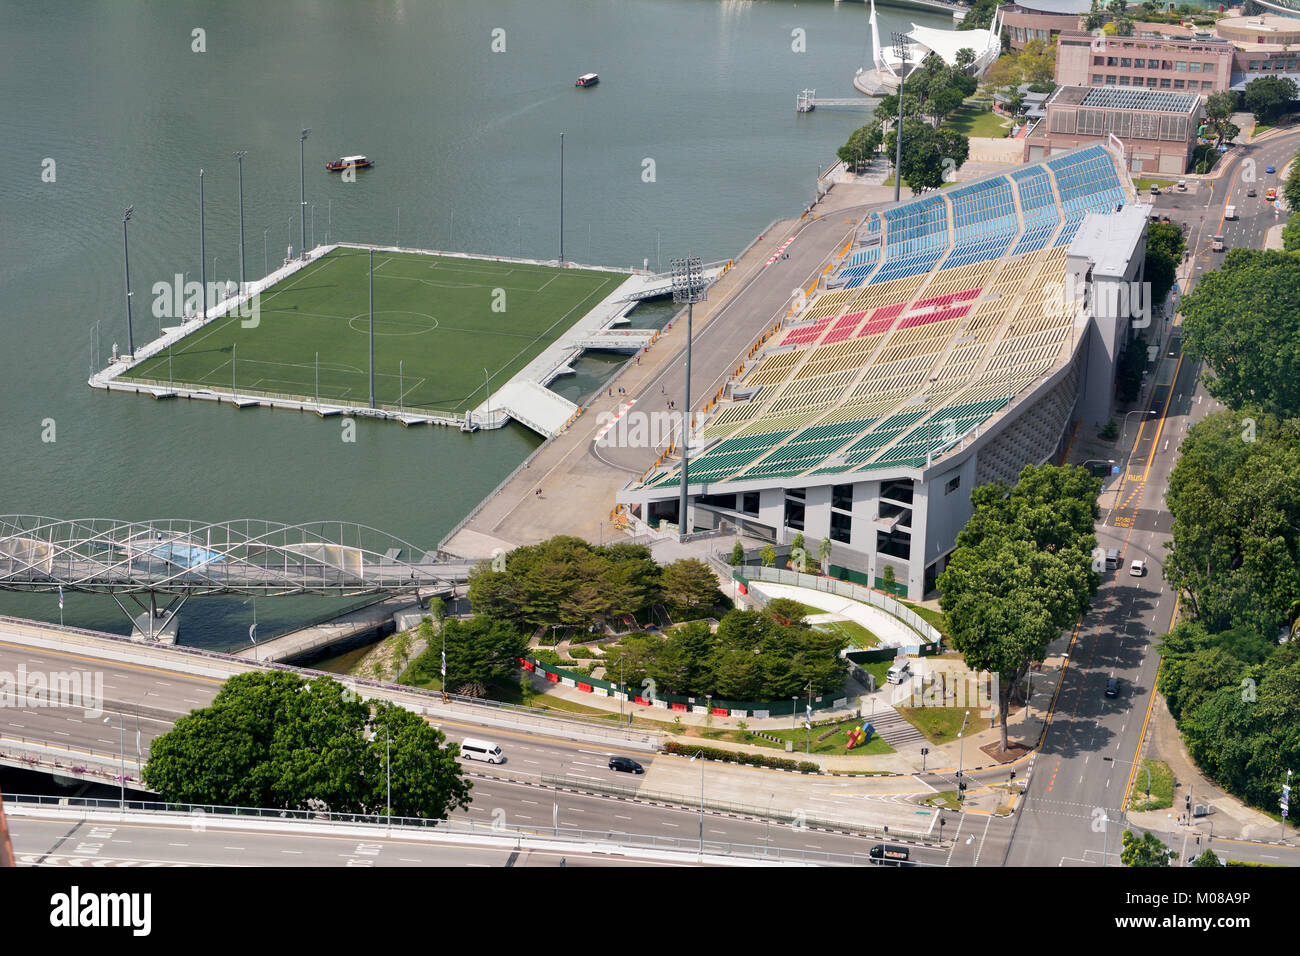 Singapore, Singapore - December 11, 2017. View over the Float at Marina Bay stadium and stage in Singapore, with surrounding buildings and city traffi Stock Photo